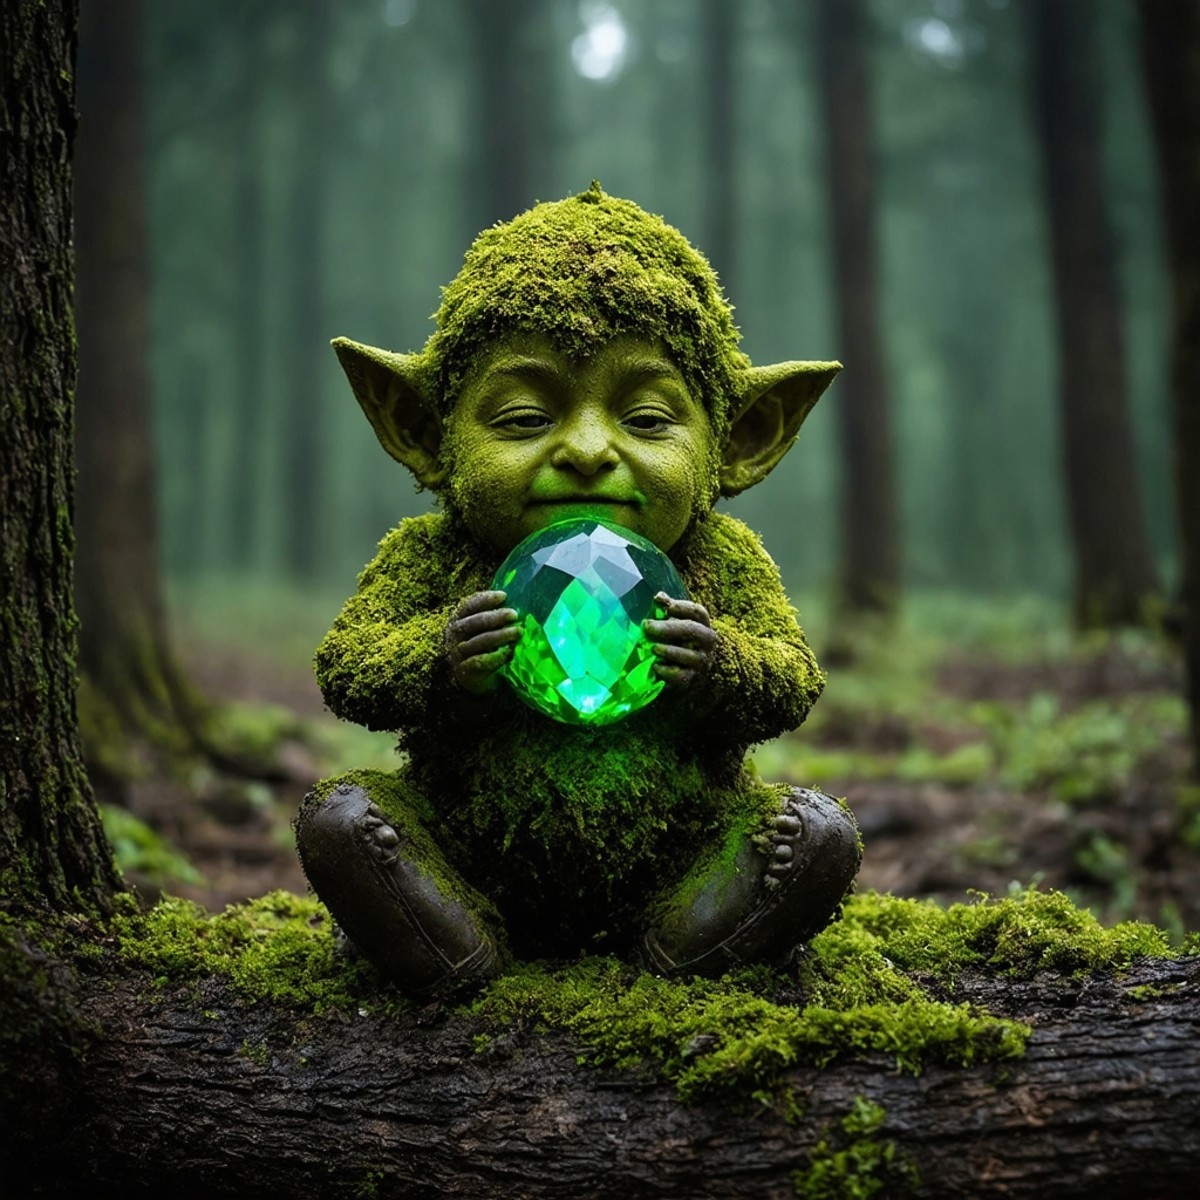 A small, moss-covered figure sitting on a fallen tree trunk in a dense forest. It is holding up a large, bright green gemstone up to its face. The figure's body blends into the surrounding moss and foliage, of the woodland environment. 